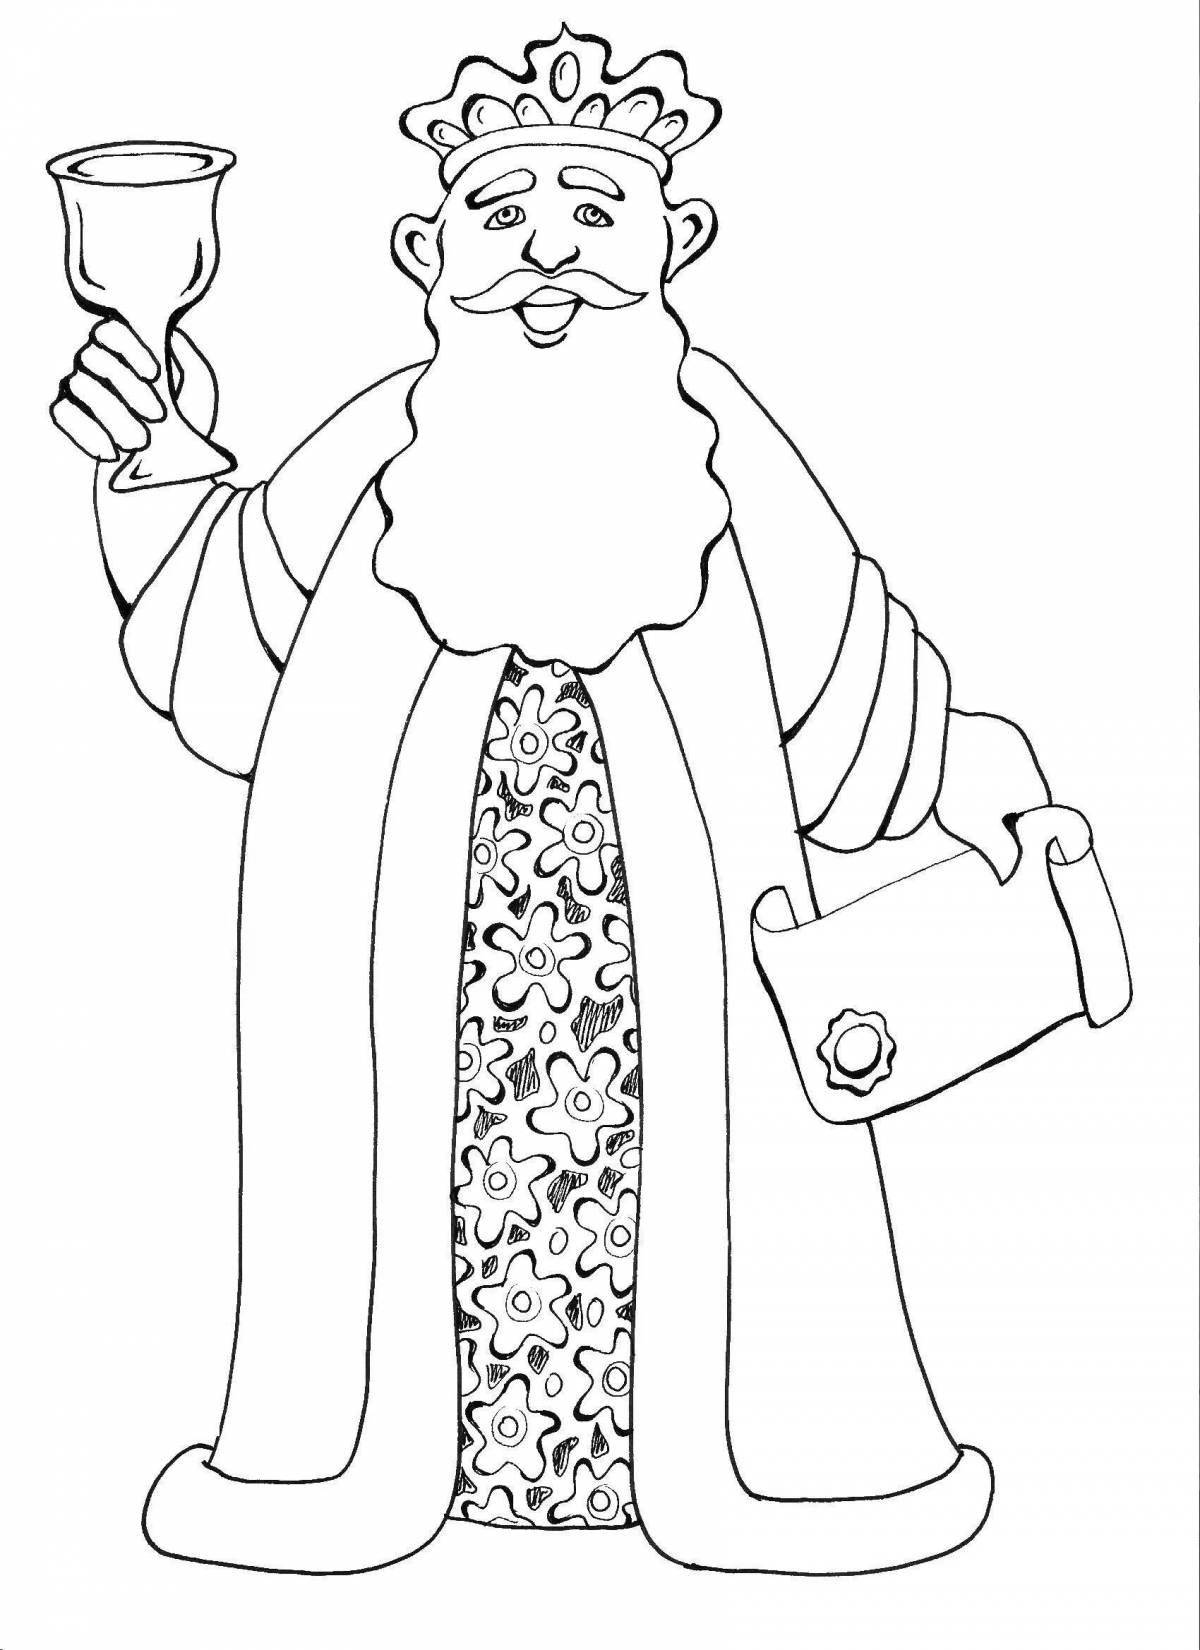 Shining king coloring pages for kids